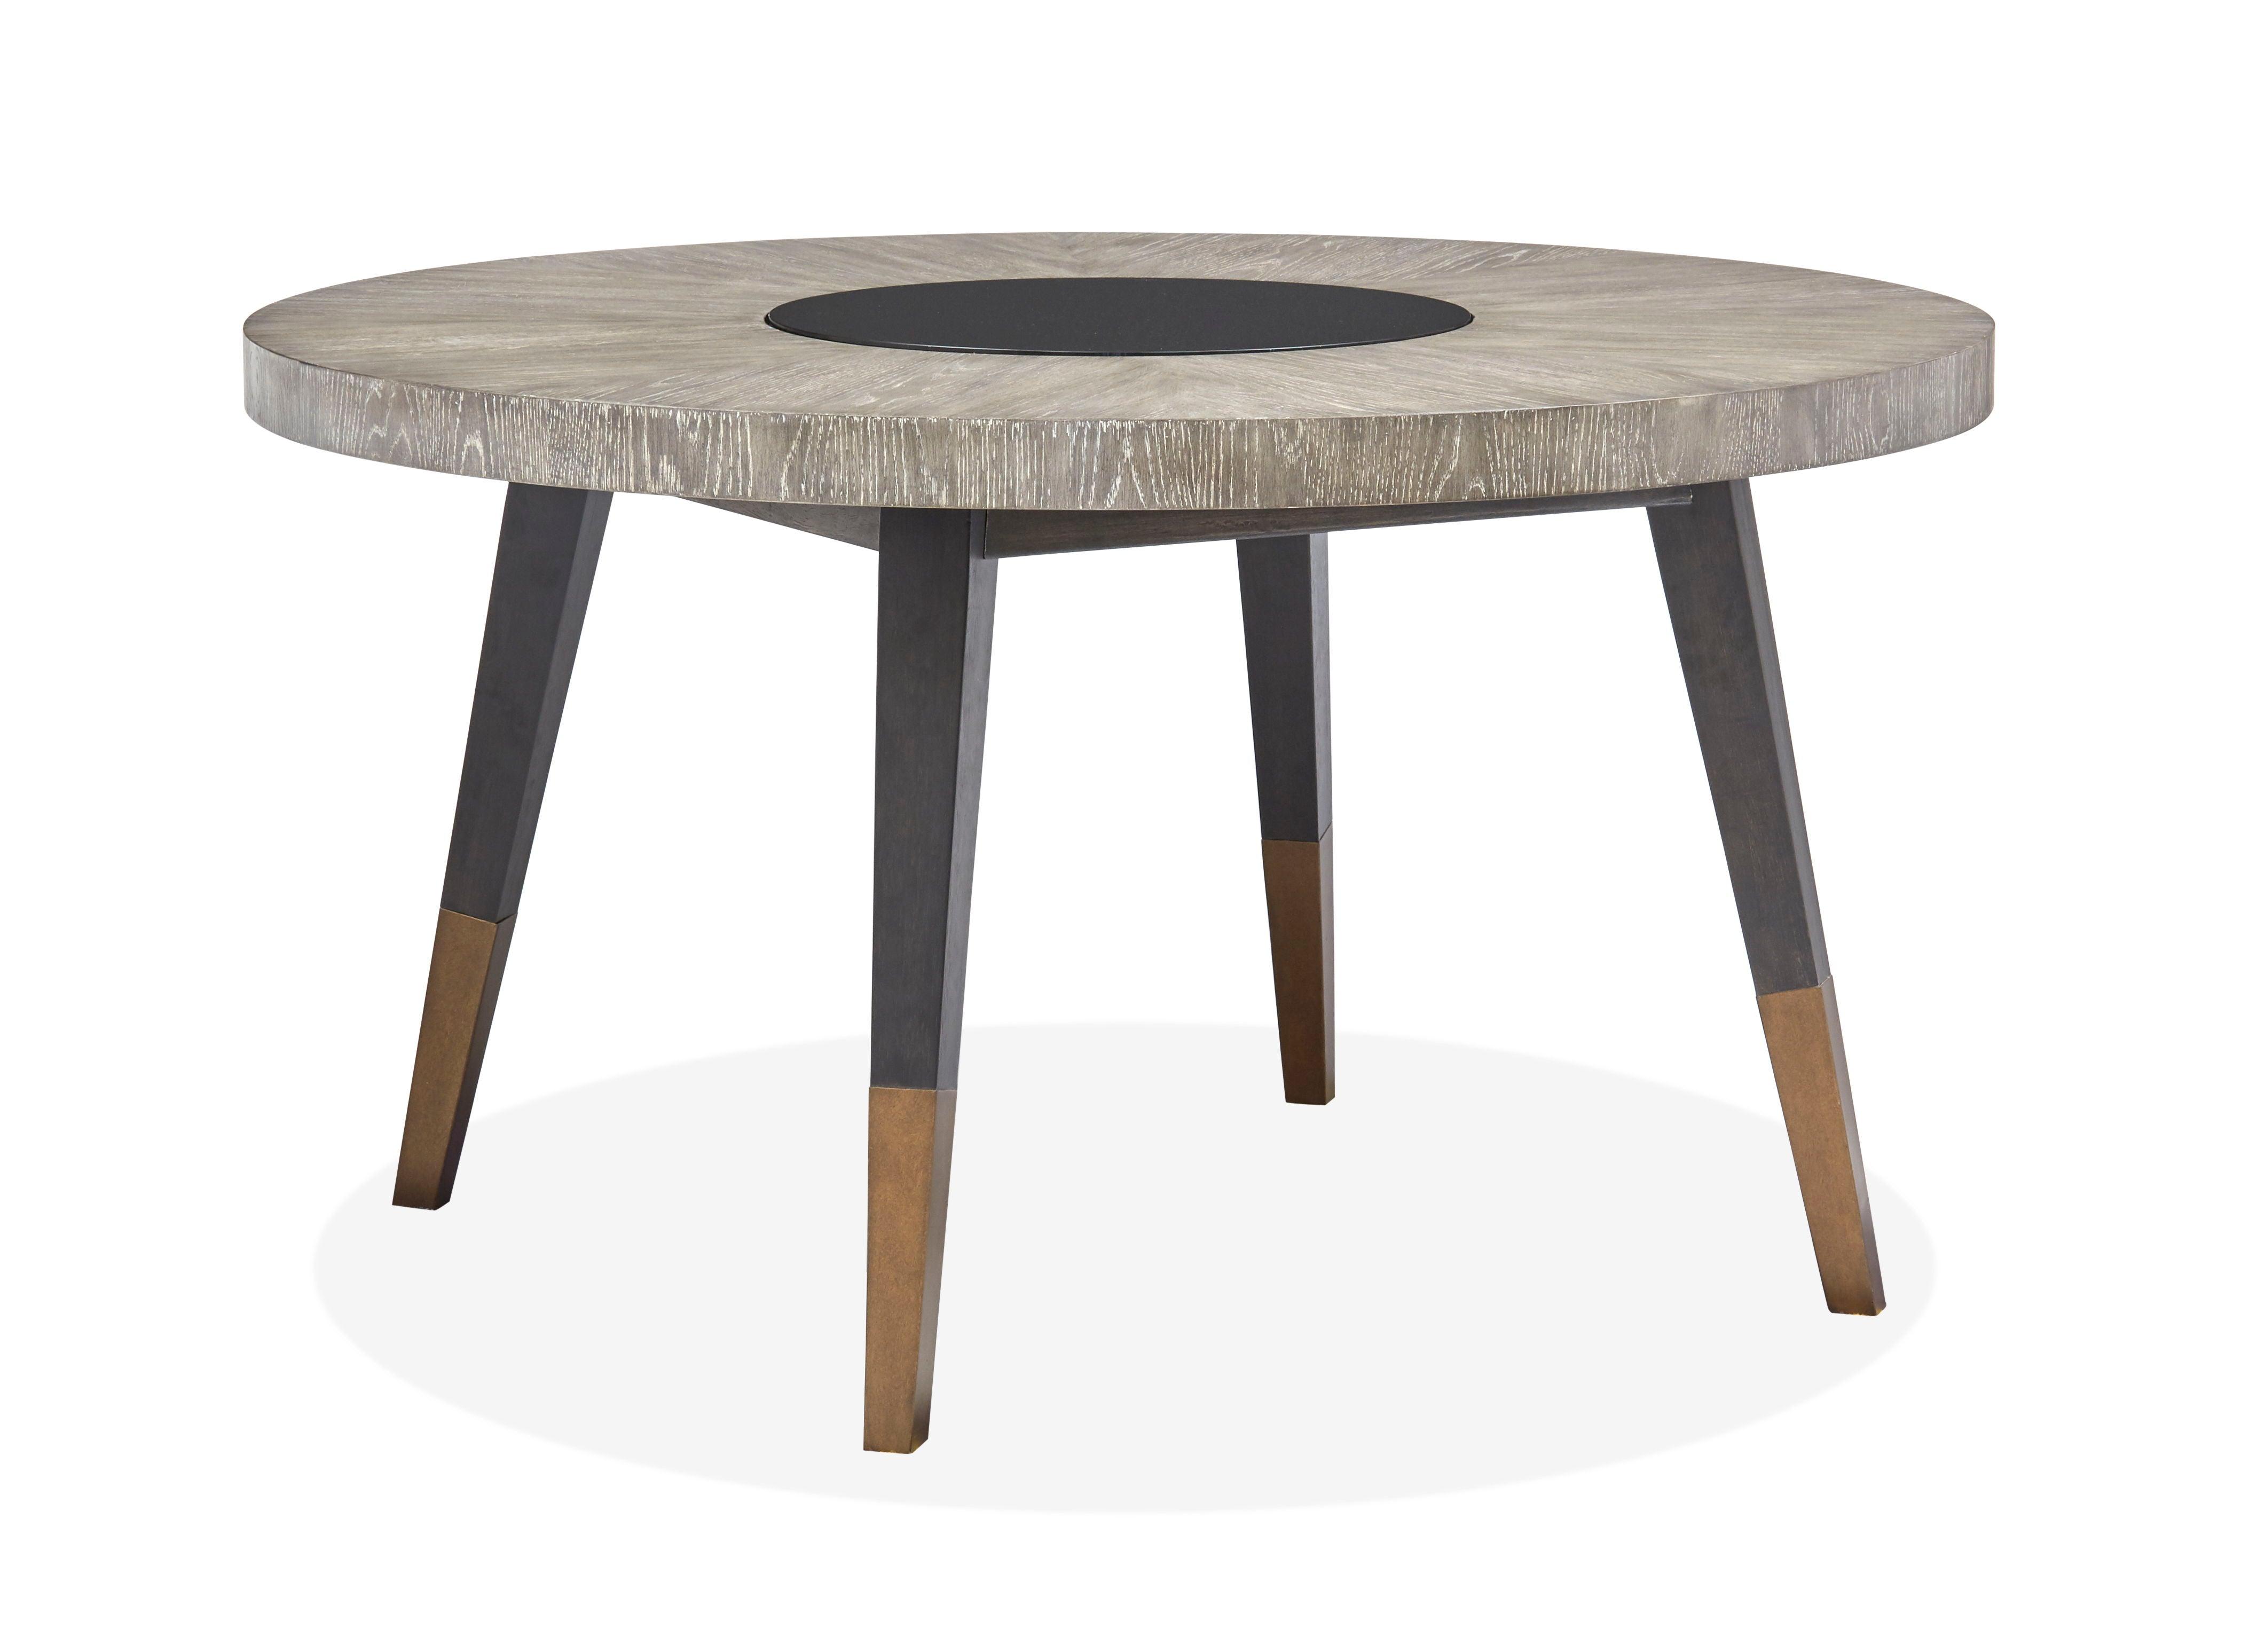 Magnussen Furniture - Ryker - Round Dining Table - Homestead Brown - 5th Avenue Furniture